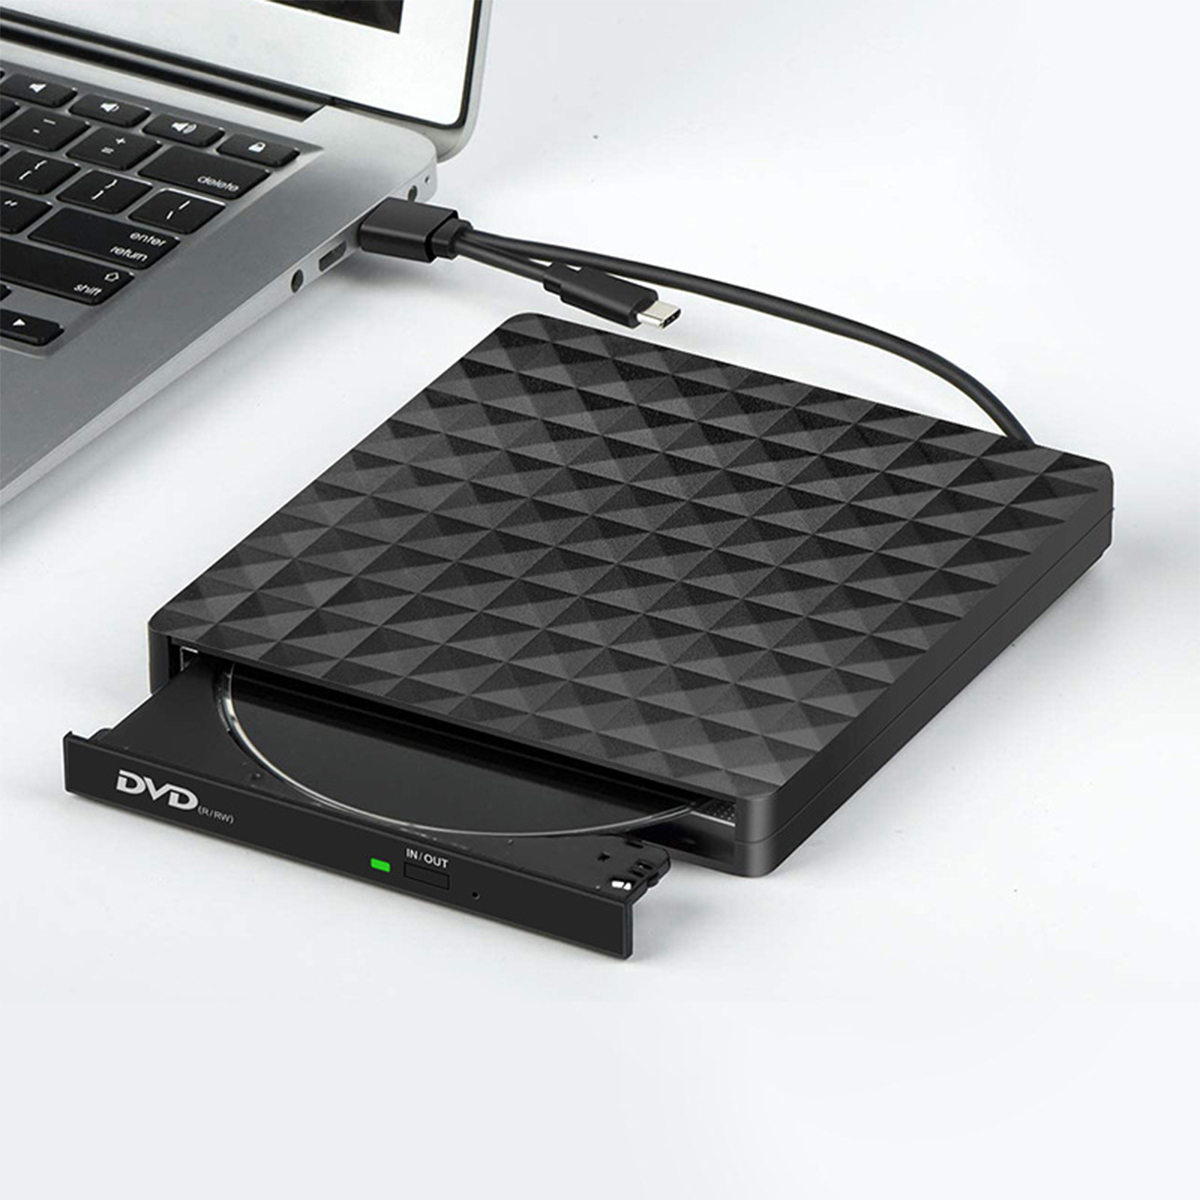 Find USB3.0 Type-C External CD DVD Optical Drive High Speed Data Transfer External DVD-RW Player External Burner Writer Rewriter for Computer PC Laptop XD002 for Sale on Gipsybee.com with cryptocurrencies